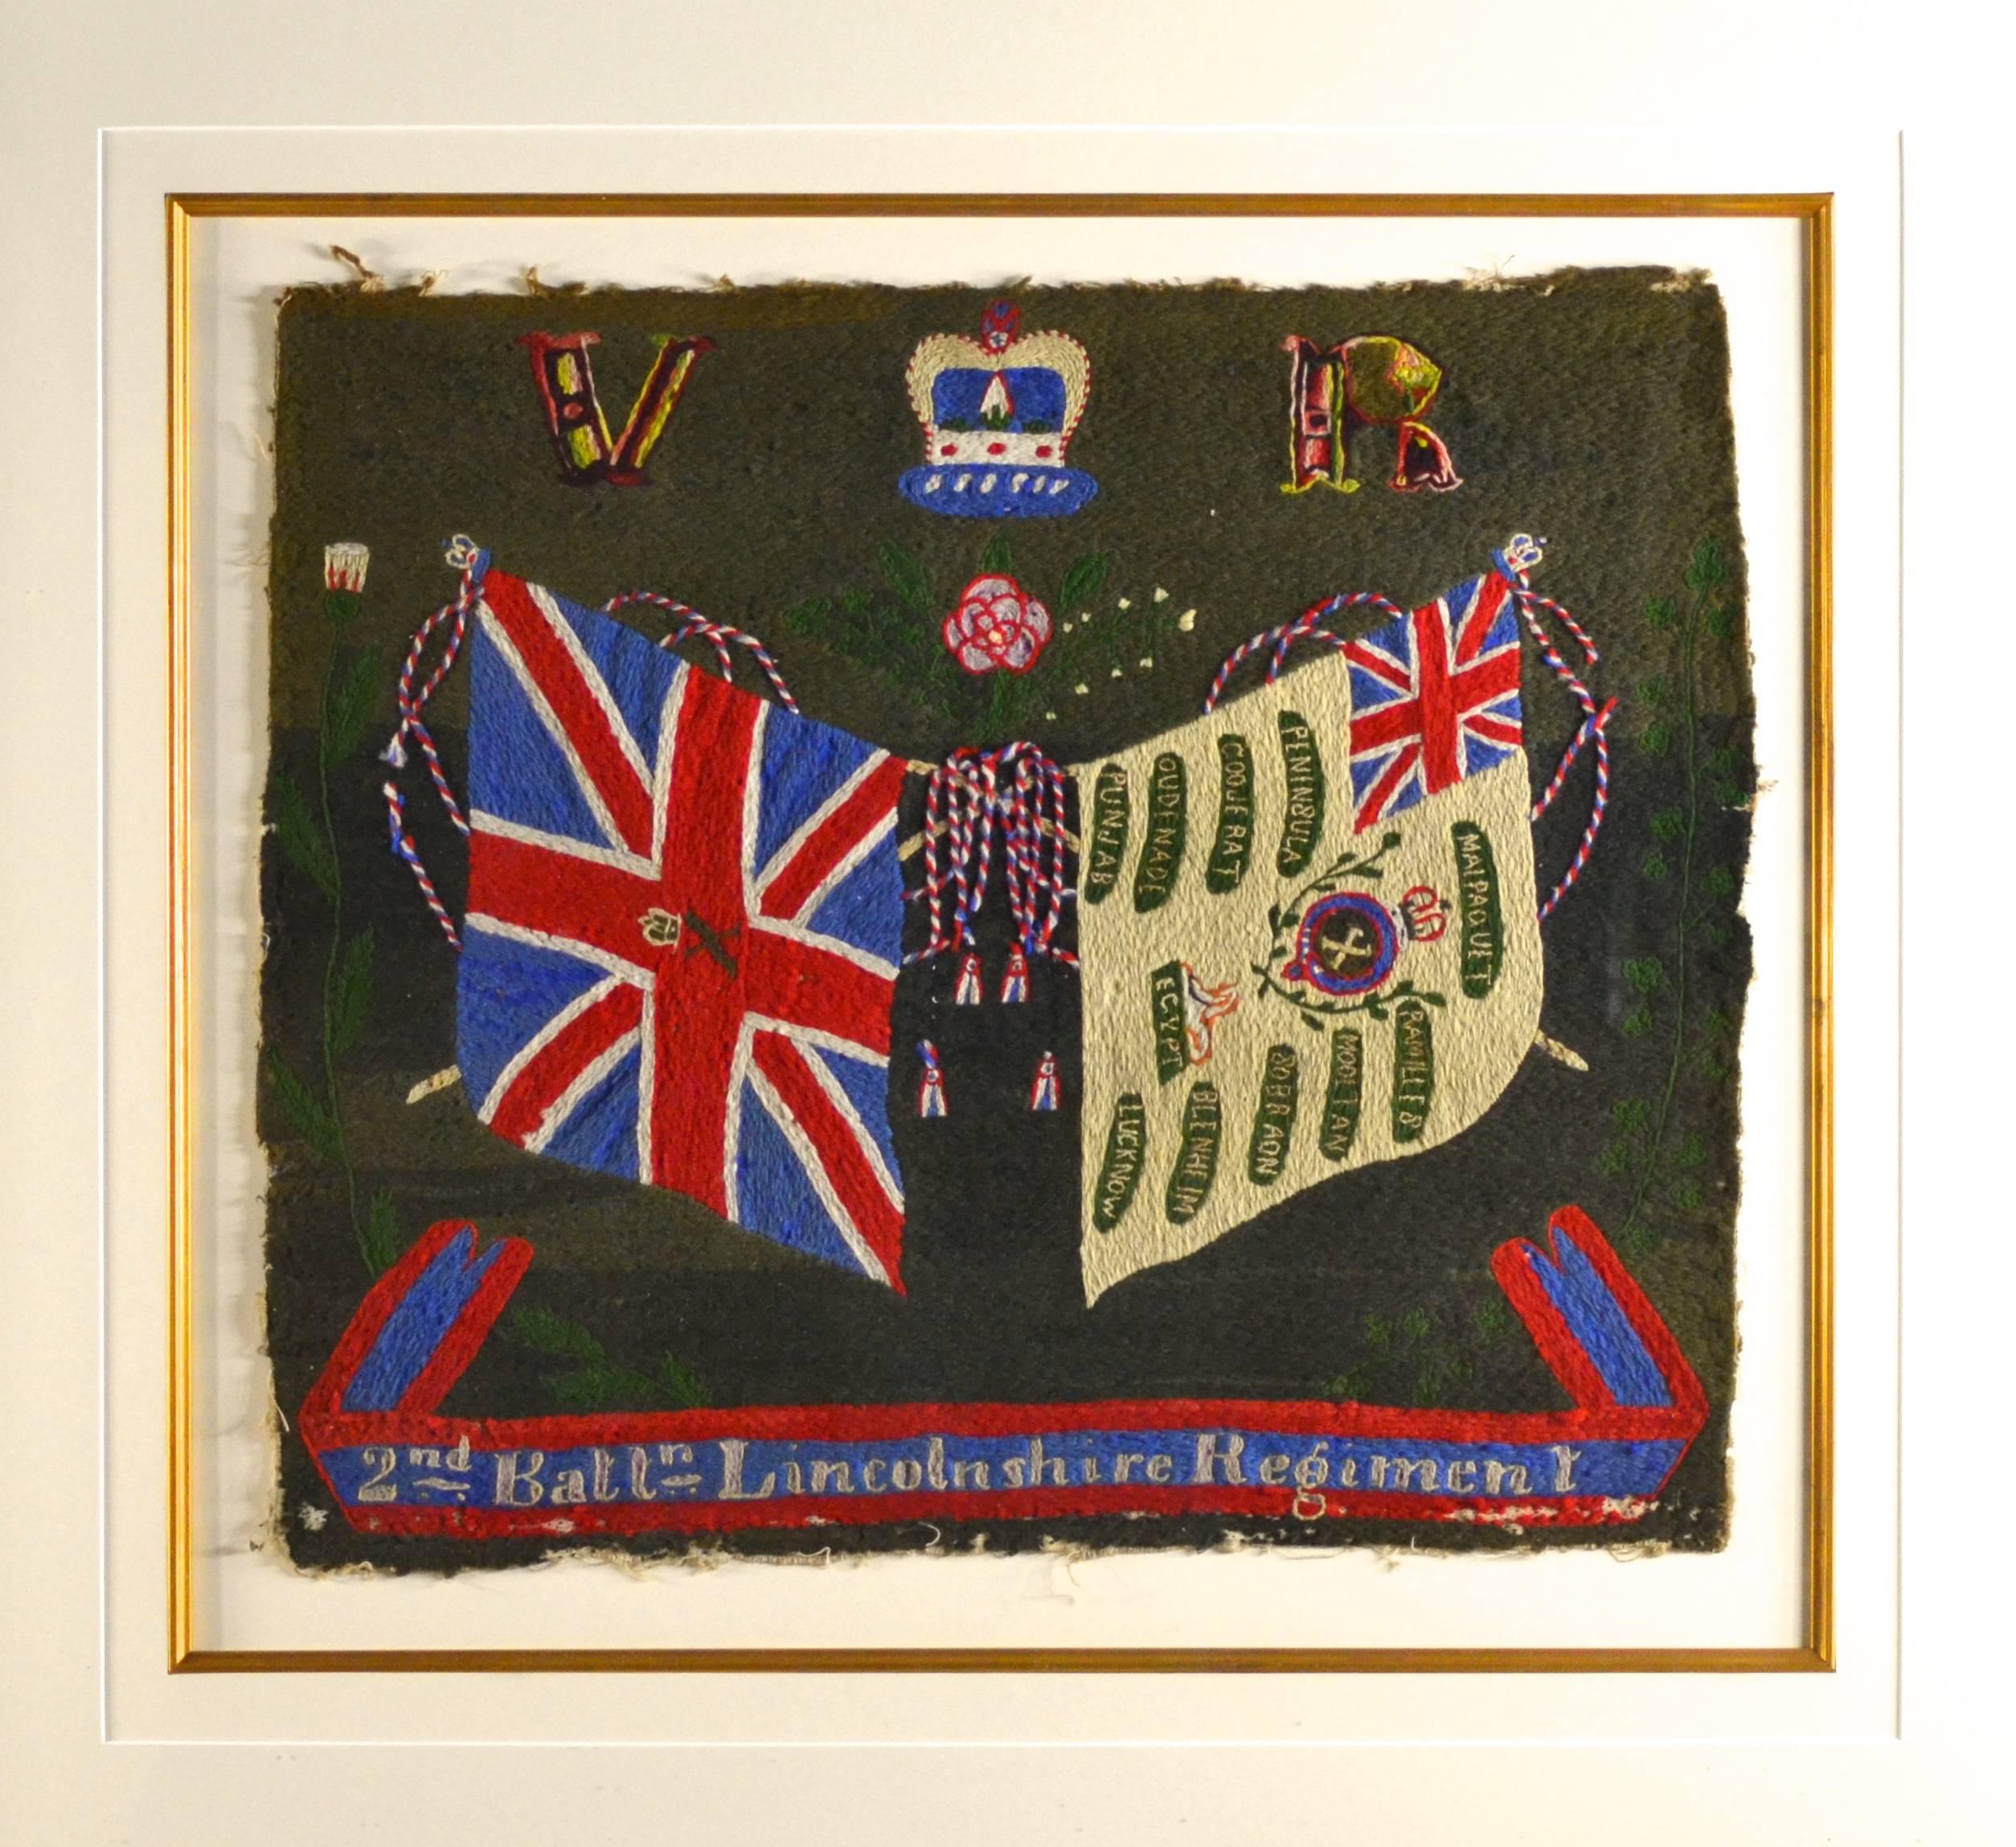 Antique WWI era British Regimental Commemorative Woolie. Appears to me hand made with silk and wool. Beautiful craftsmanship.
2nd Batallion Lincolnshire Regiment. Frame 30 x 32 Museum framing with UV acrylic. #10537

The Royal Lincolnshire